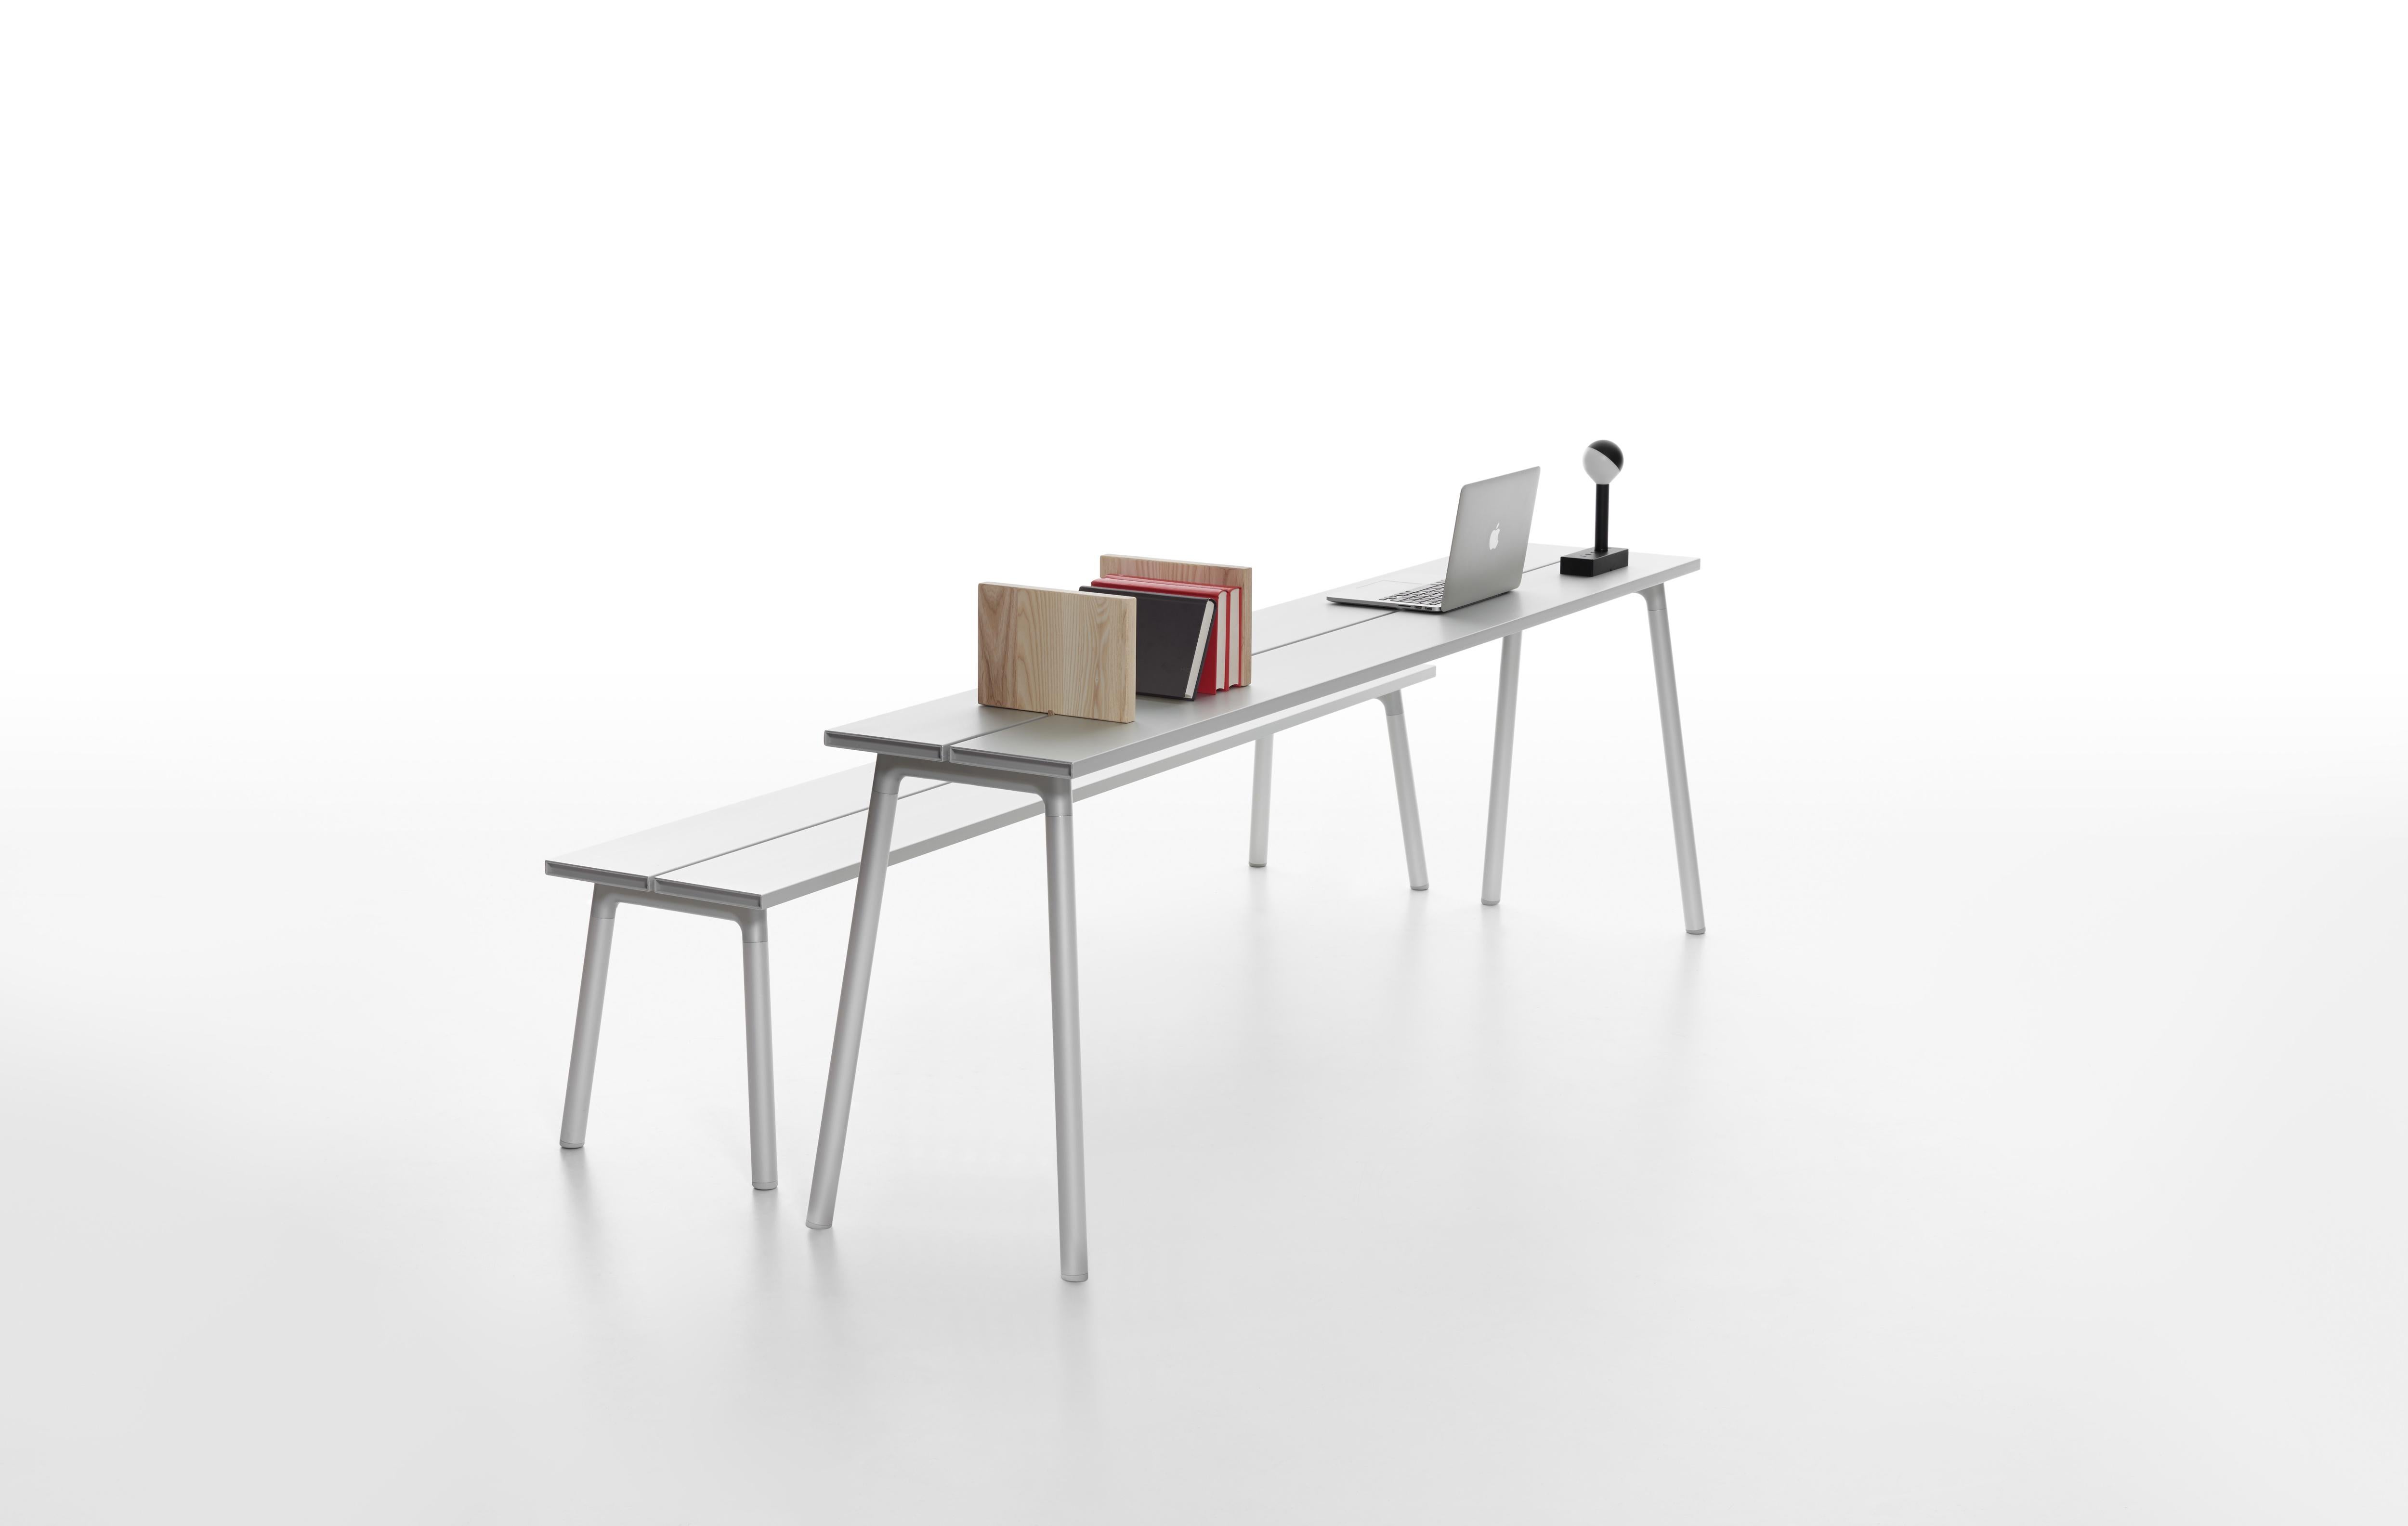 Emeco Run 4-Seat Bench in Aluminum and Ash by Sam Hecht and Kim Colin For Sale 1